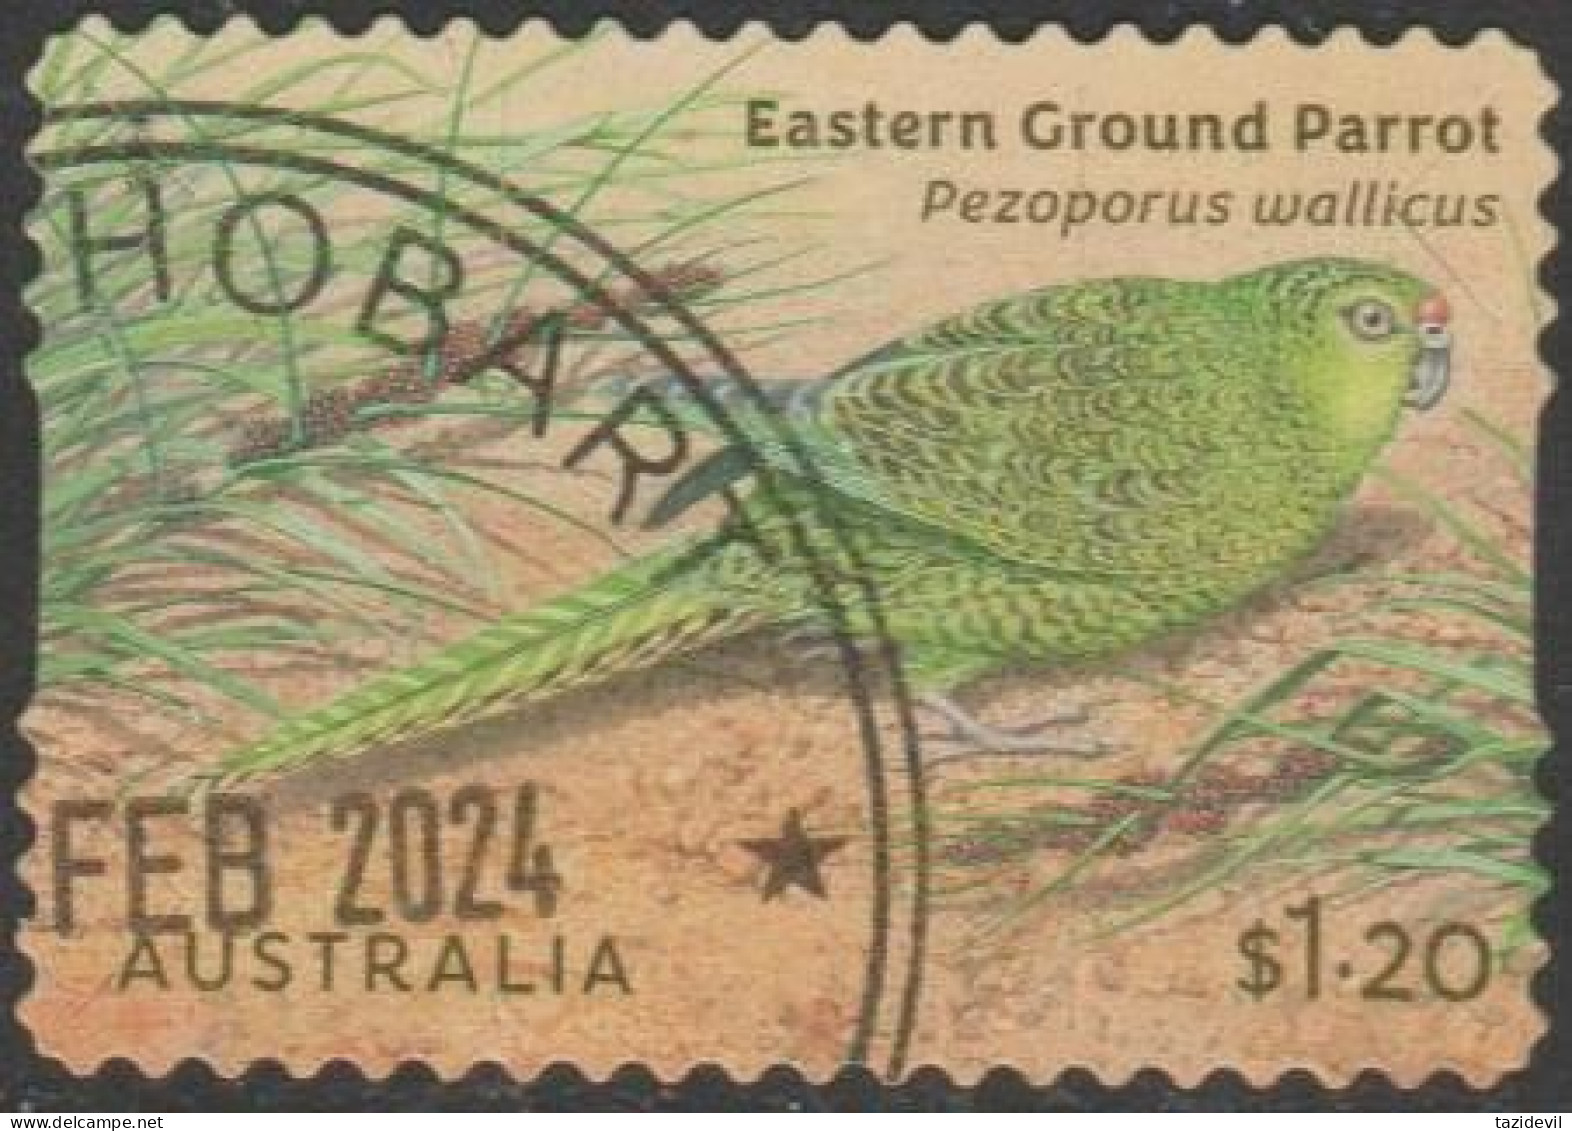 AUSTRALIA - DIE-CUT-USED 2024 $1.20 Australian Ground Parrots - Eastern Ground Parrot - Used Stamps